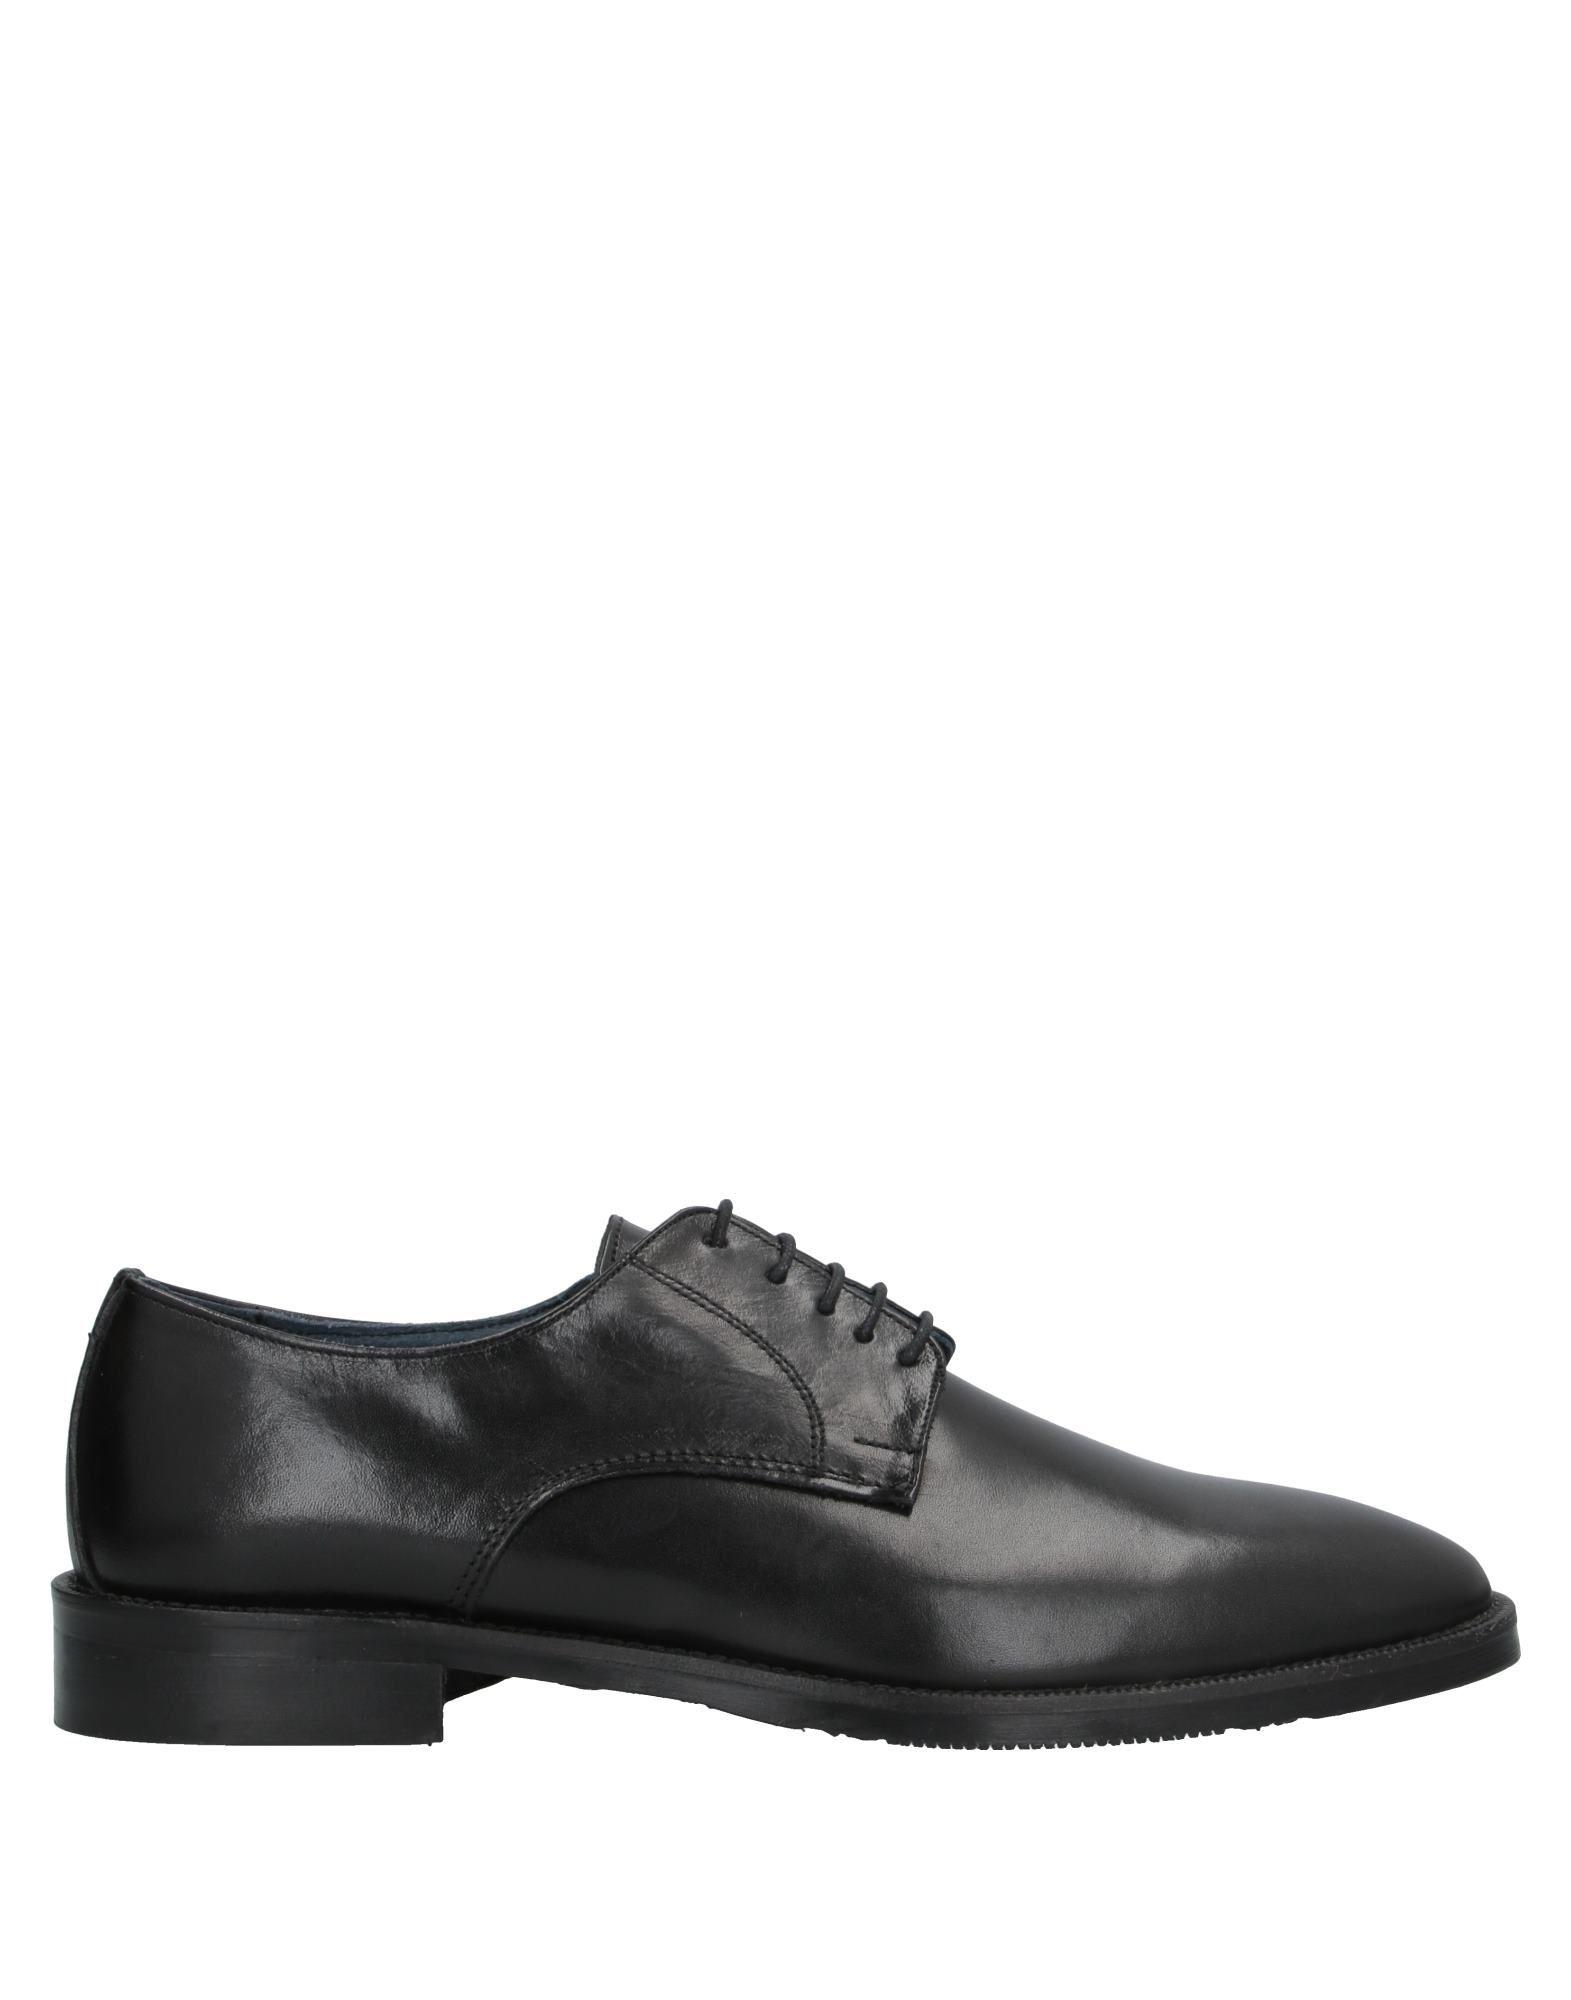 Gianfranco Lattanzi Leather Lace-up Shoe in Black for Men - Save 6% - Lyst